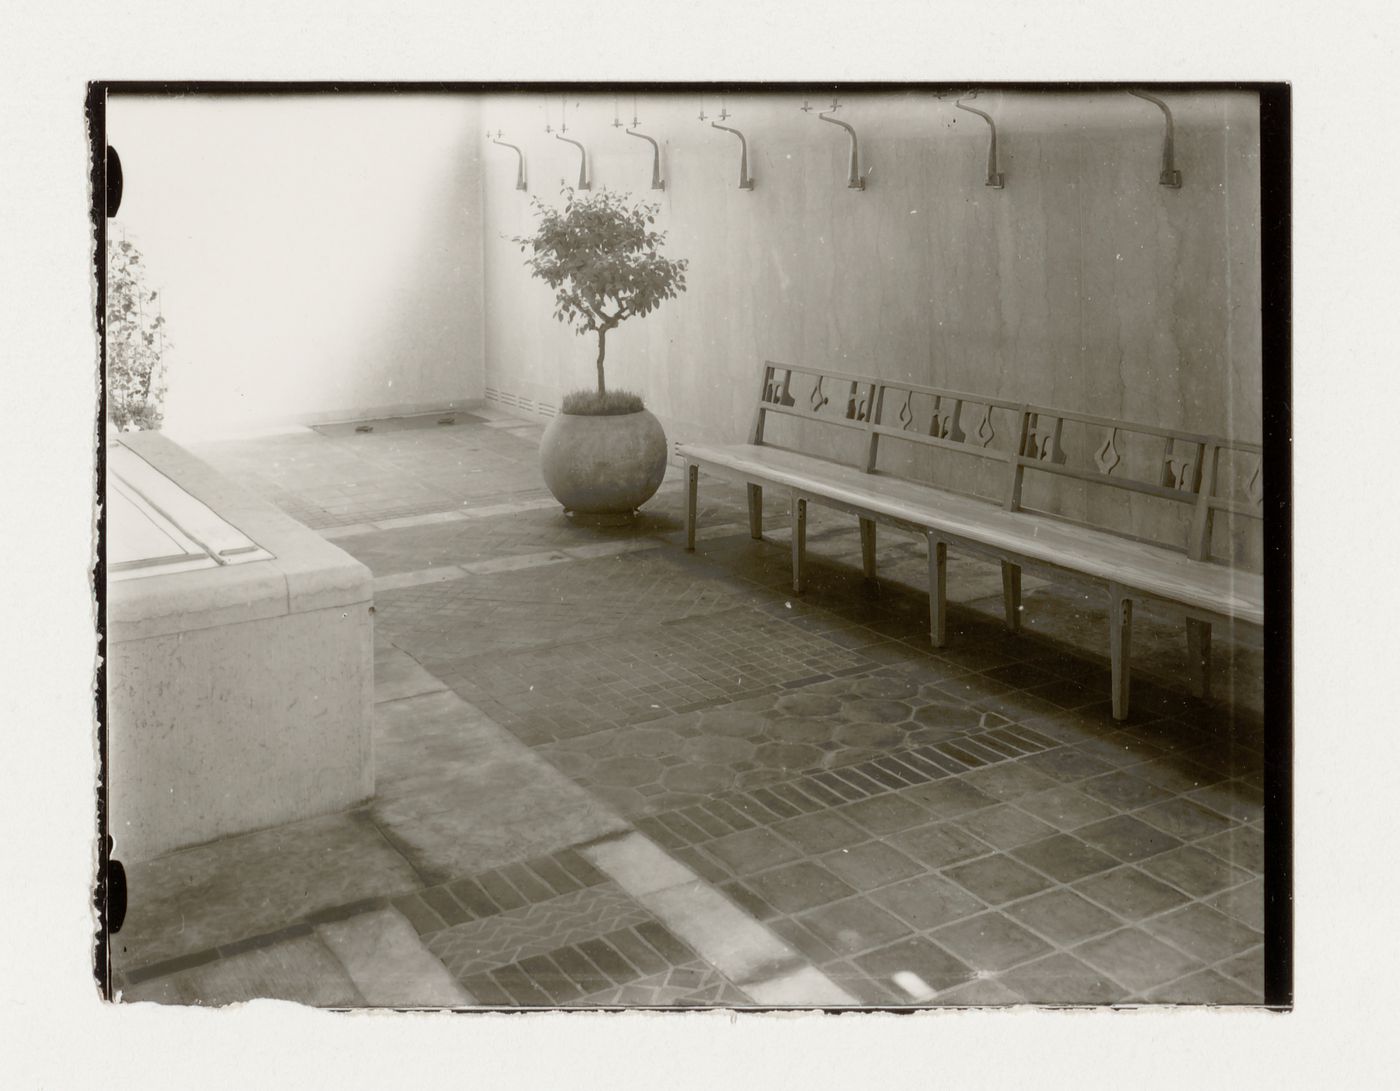 Interior view of the Chapel of Faith showing pews and ceramic floor tiles [?], Woodland Crematorium and Cemetery, Stockholm